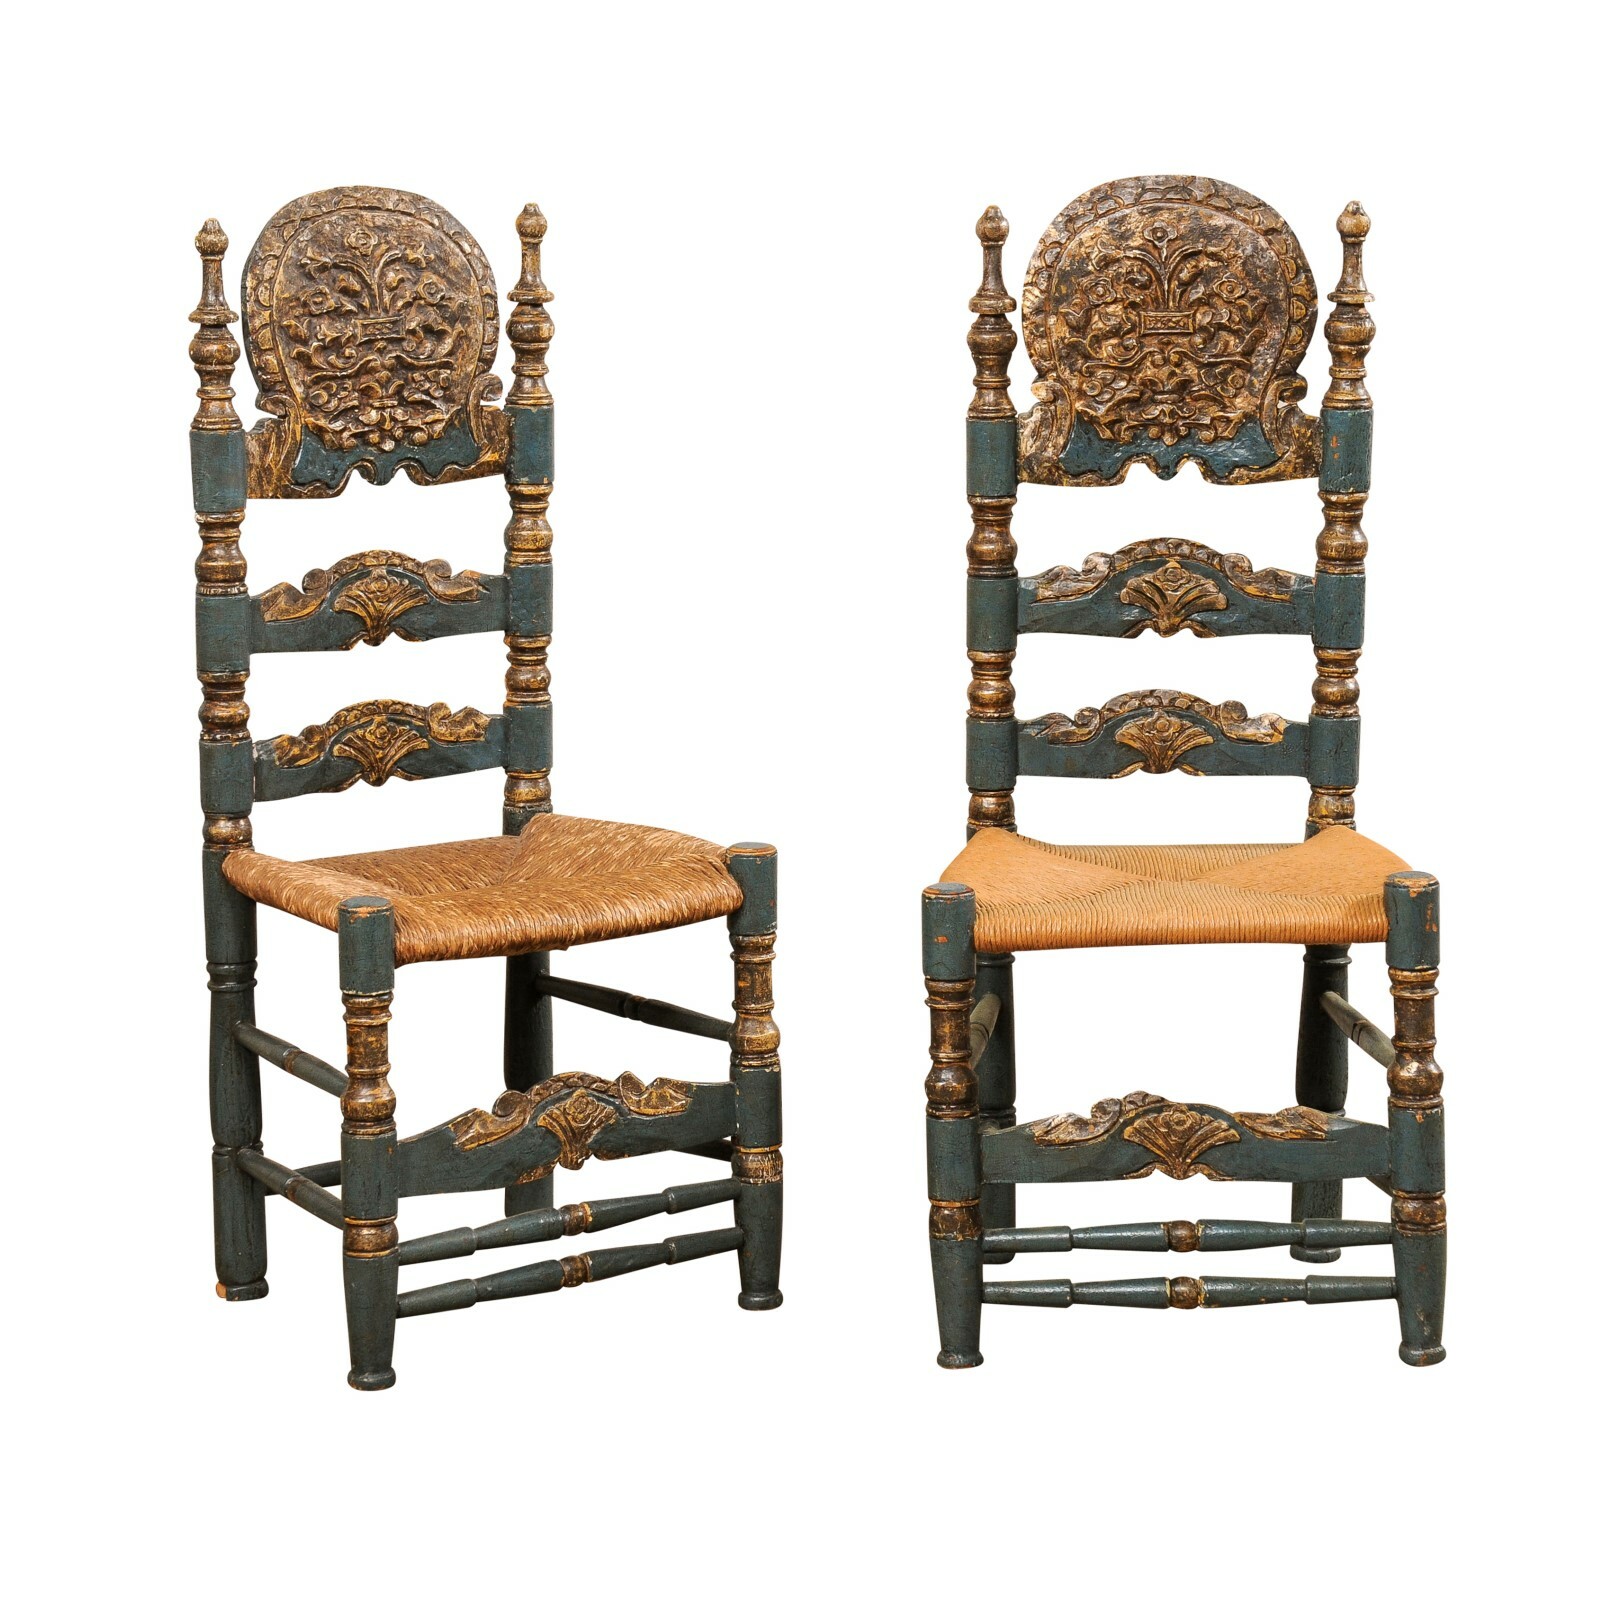 Spanish Colonial Style Ladder-Back Chairs